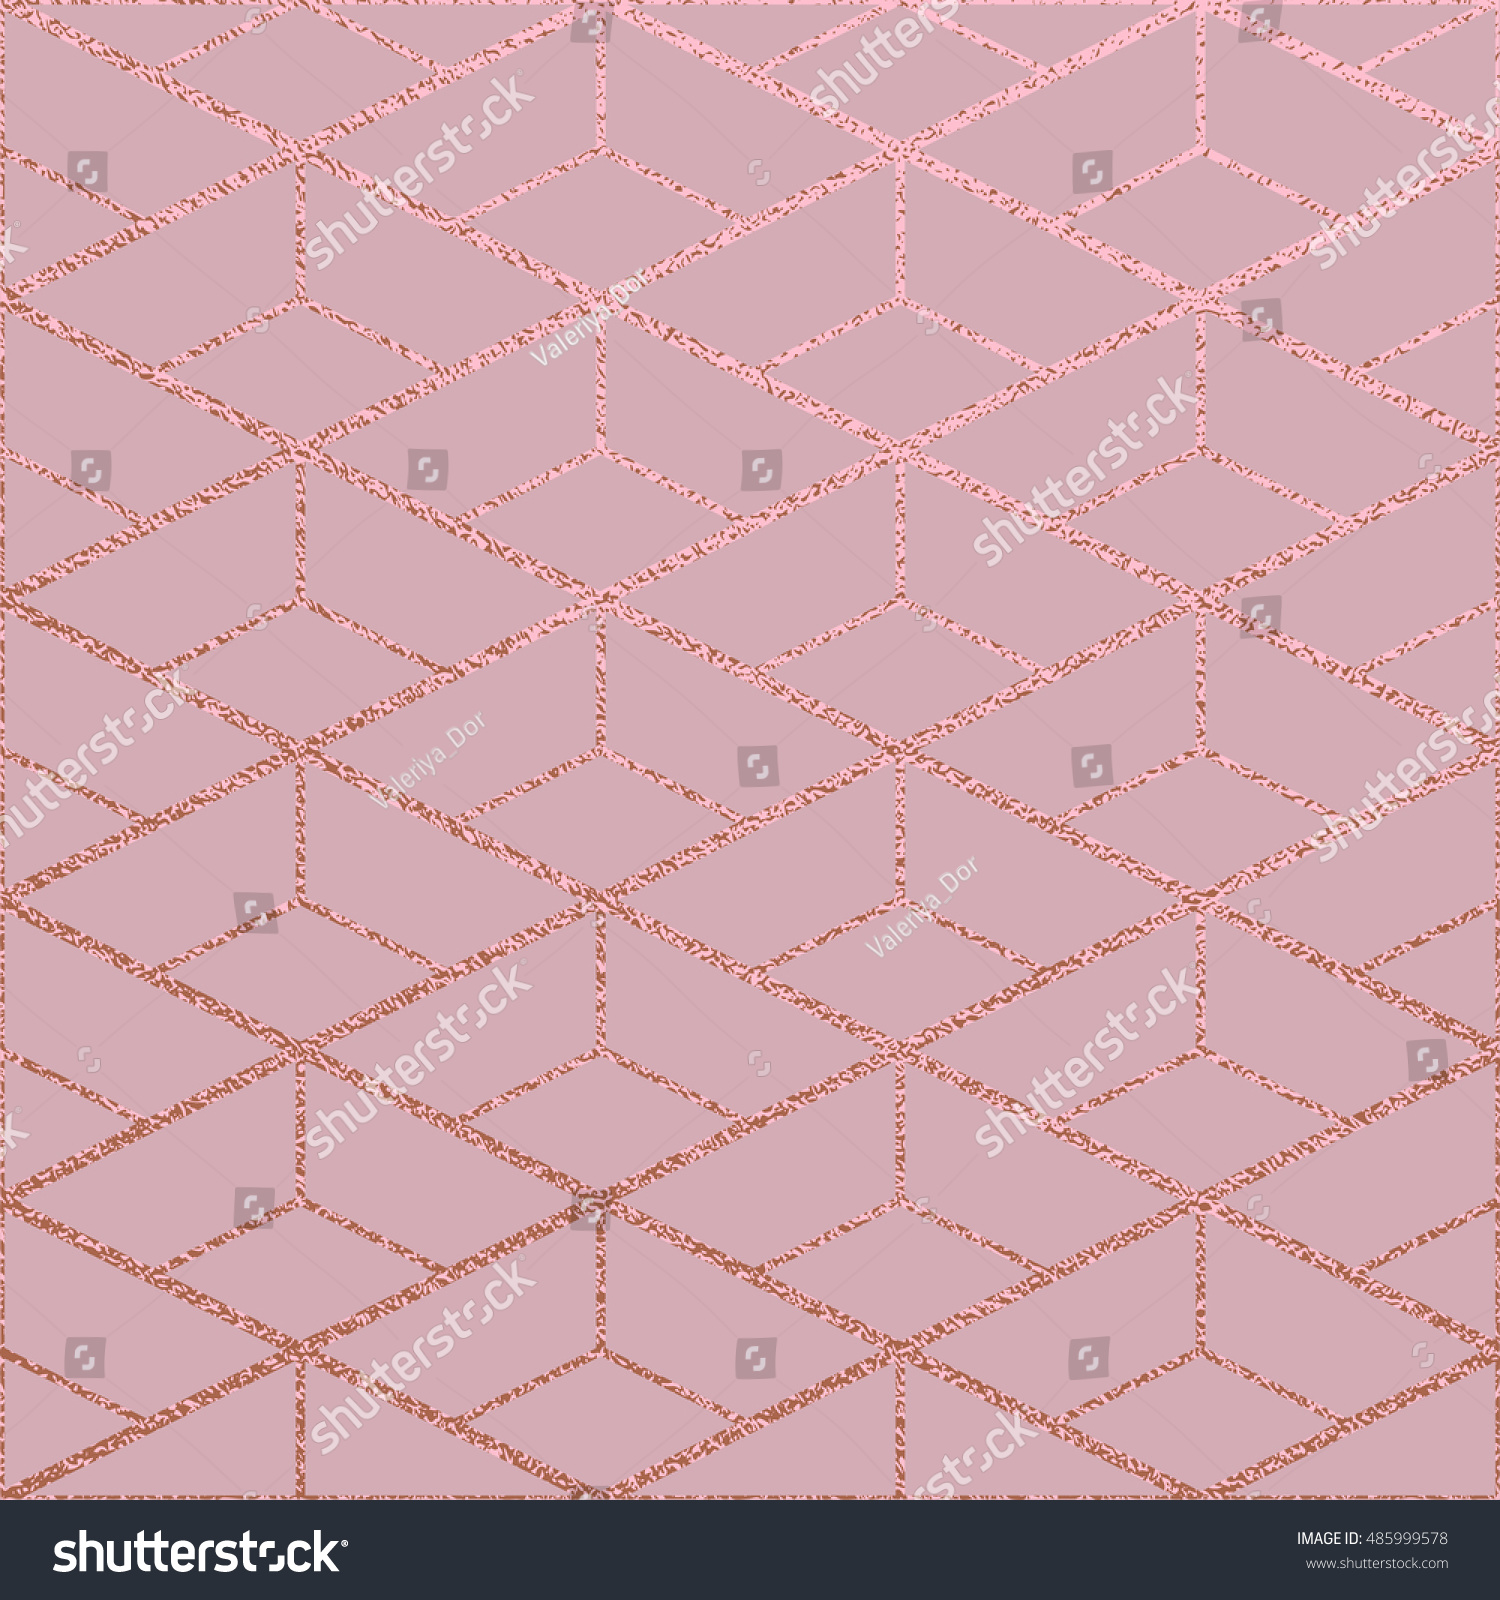 SVG of Metallic glossy texture. Rose quartz pattern. Abstract shiny background. Luxury sparkling background. svg